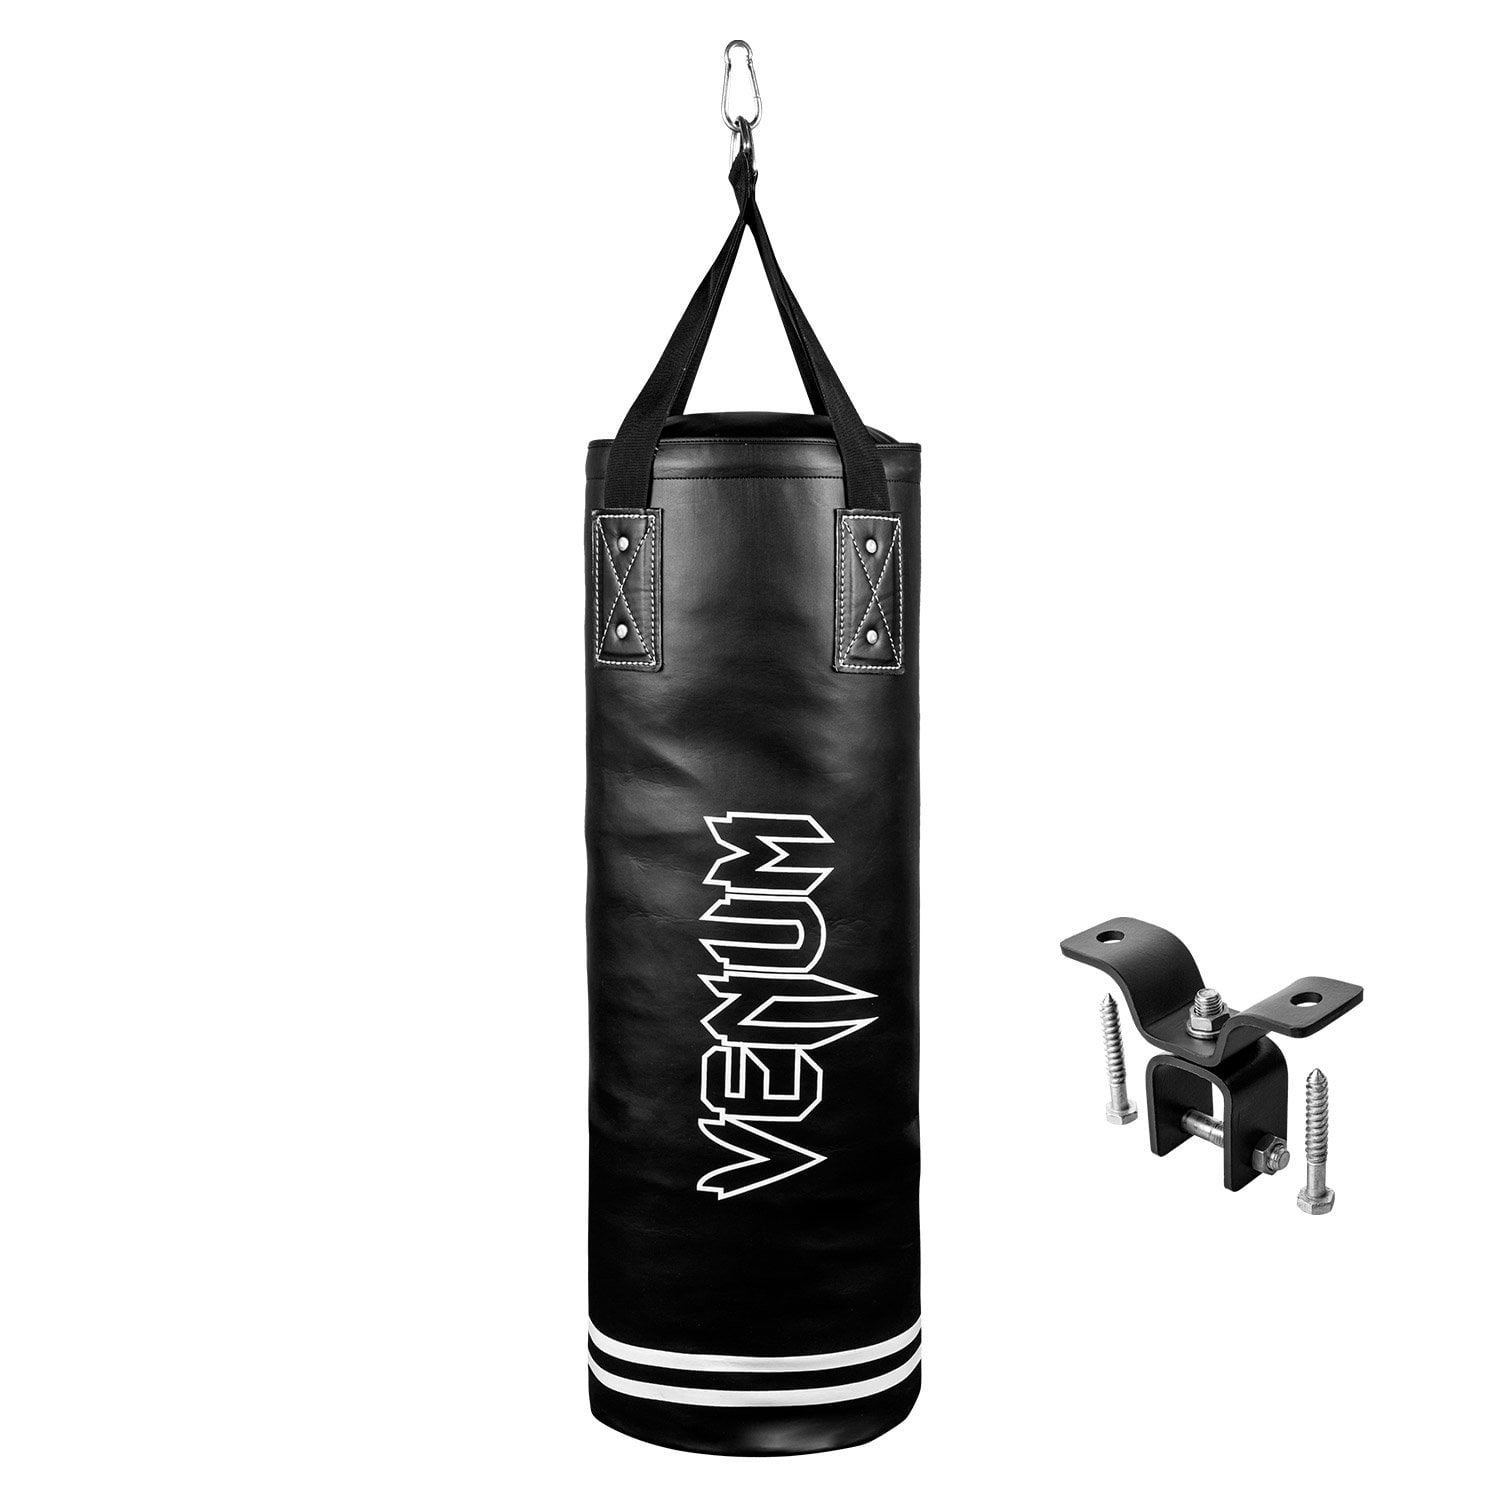 Heavy Bag Kit Wraps Gloves Boxing MMA Punching Training Fight Exercise 70lbs NEW